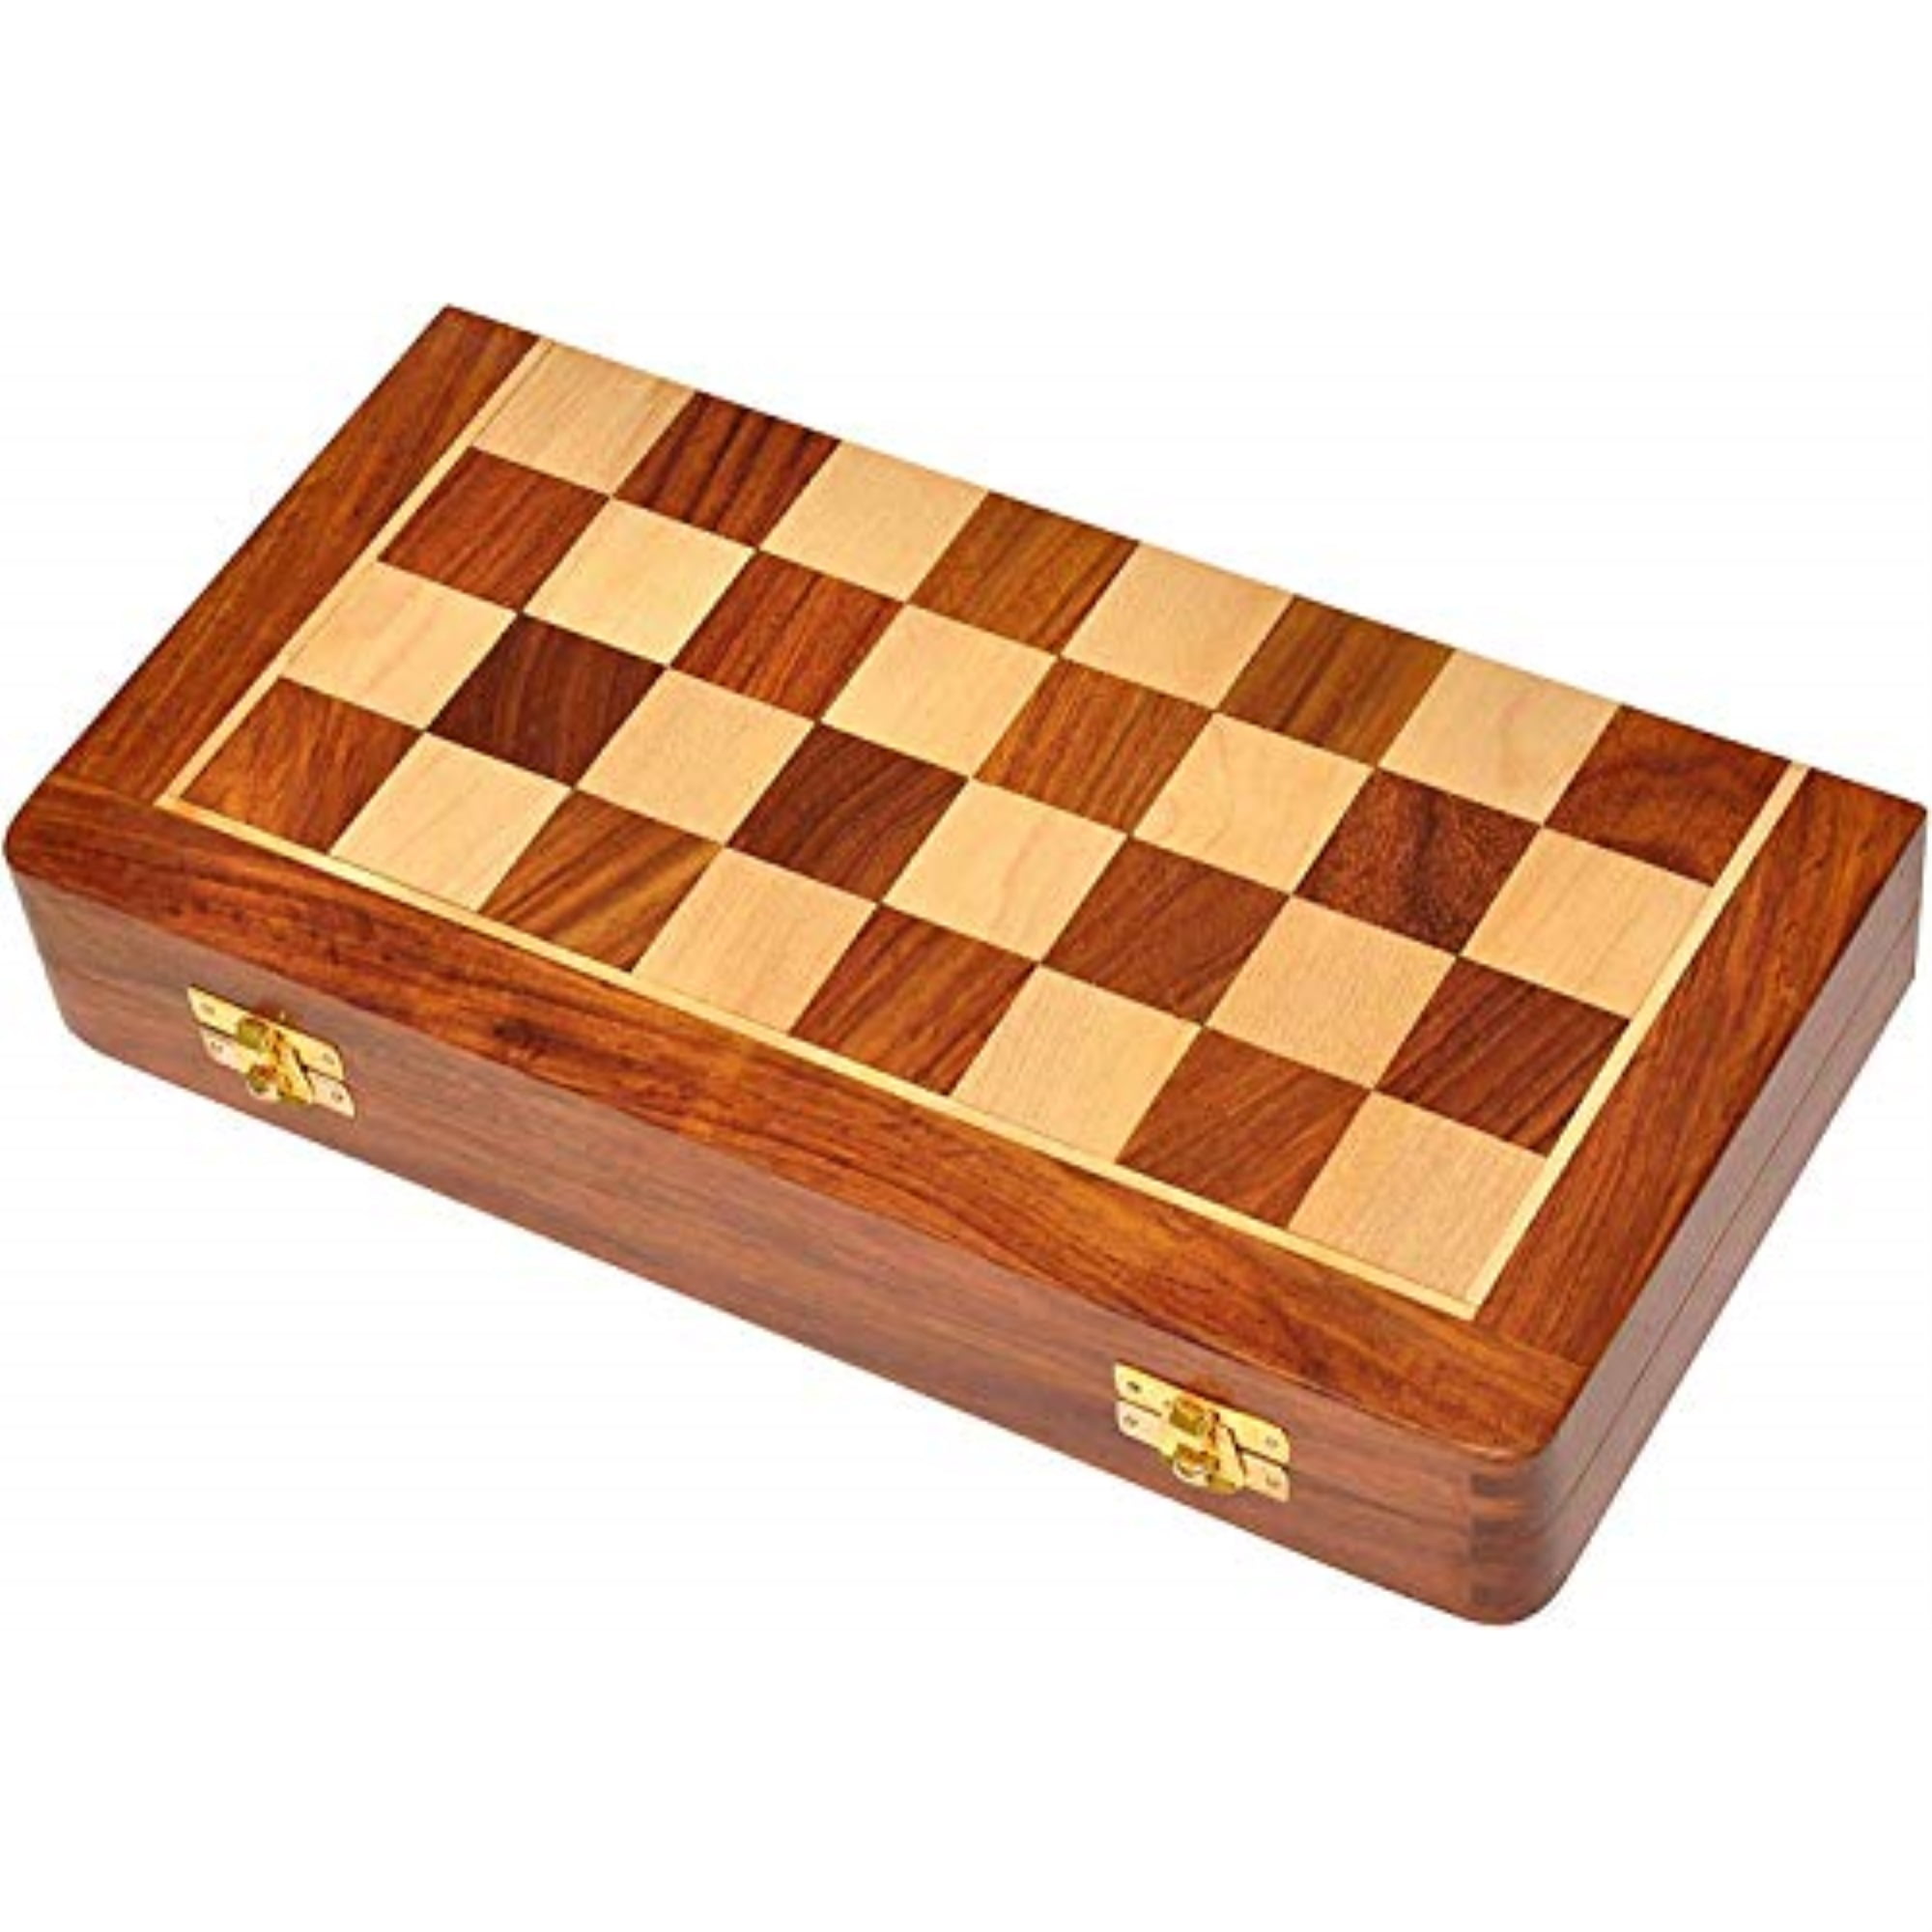 12in Vintage Wooden Chess Set Magnetic Pieces Wood Board Folding Game Chessboard 